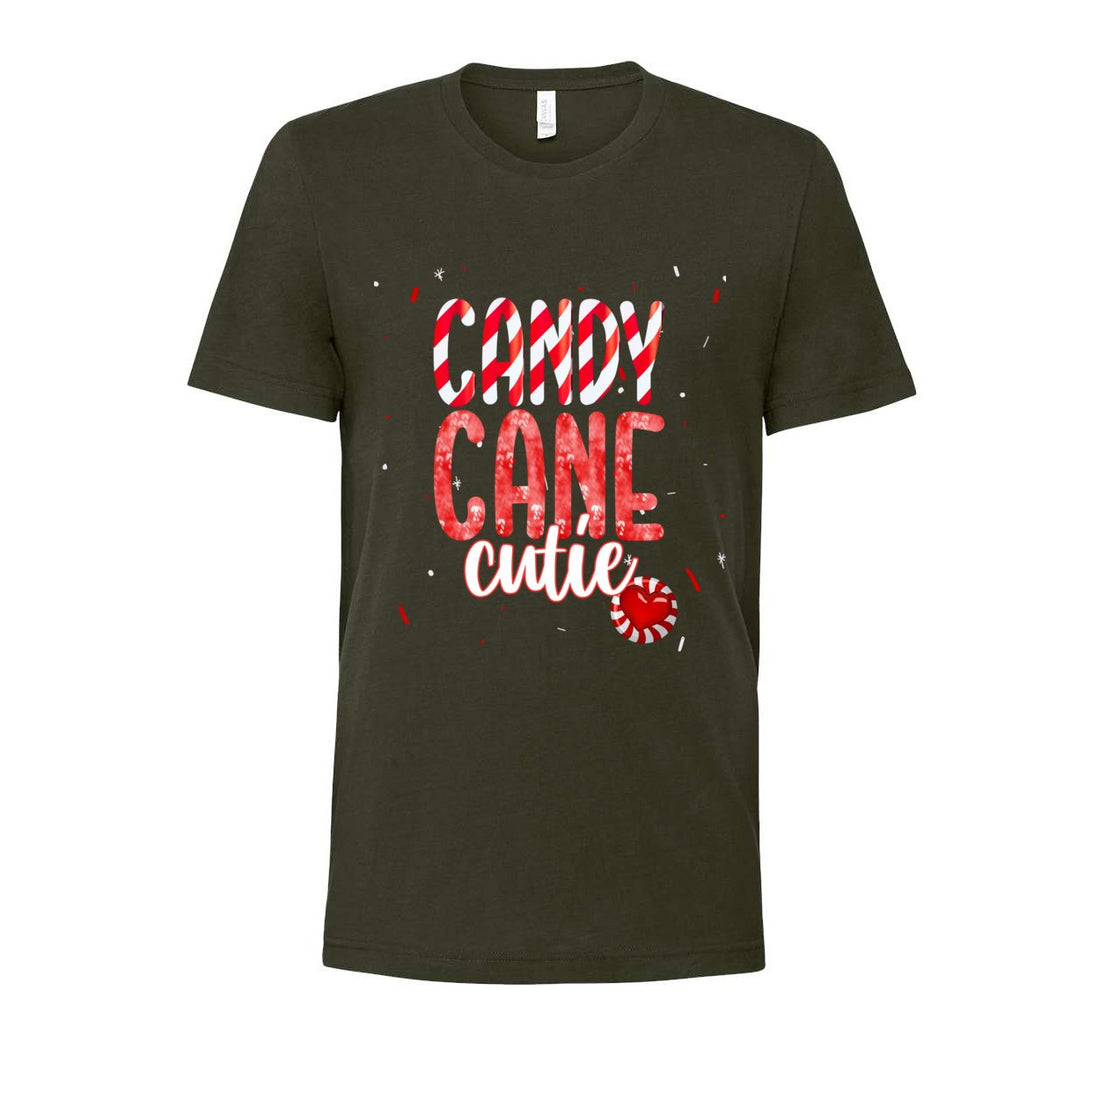 Candy Cane Cutie - T-Shirts - Positively Sassy - Candy Cane Cutie